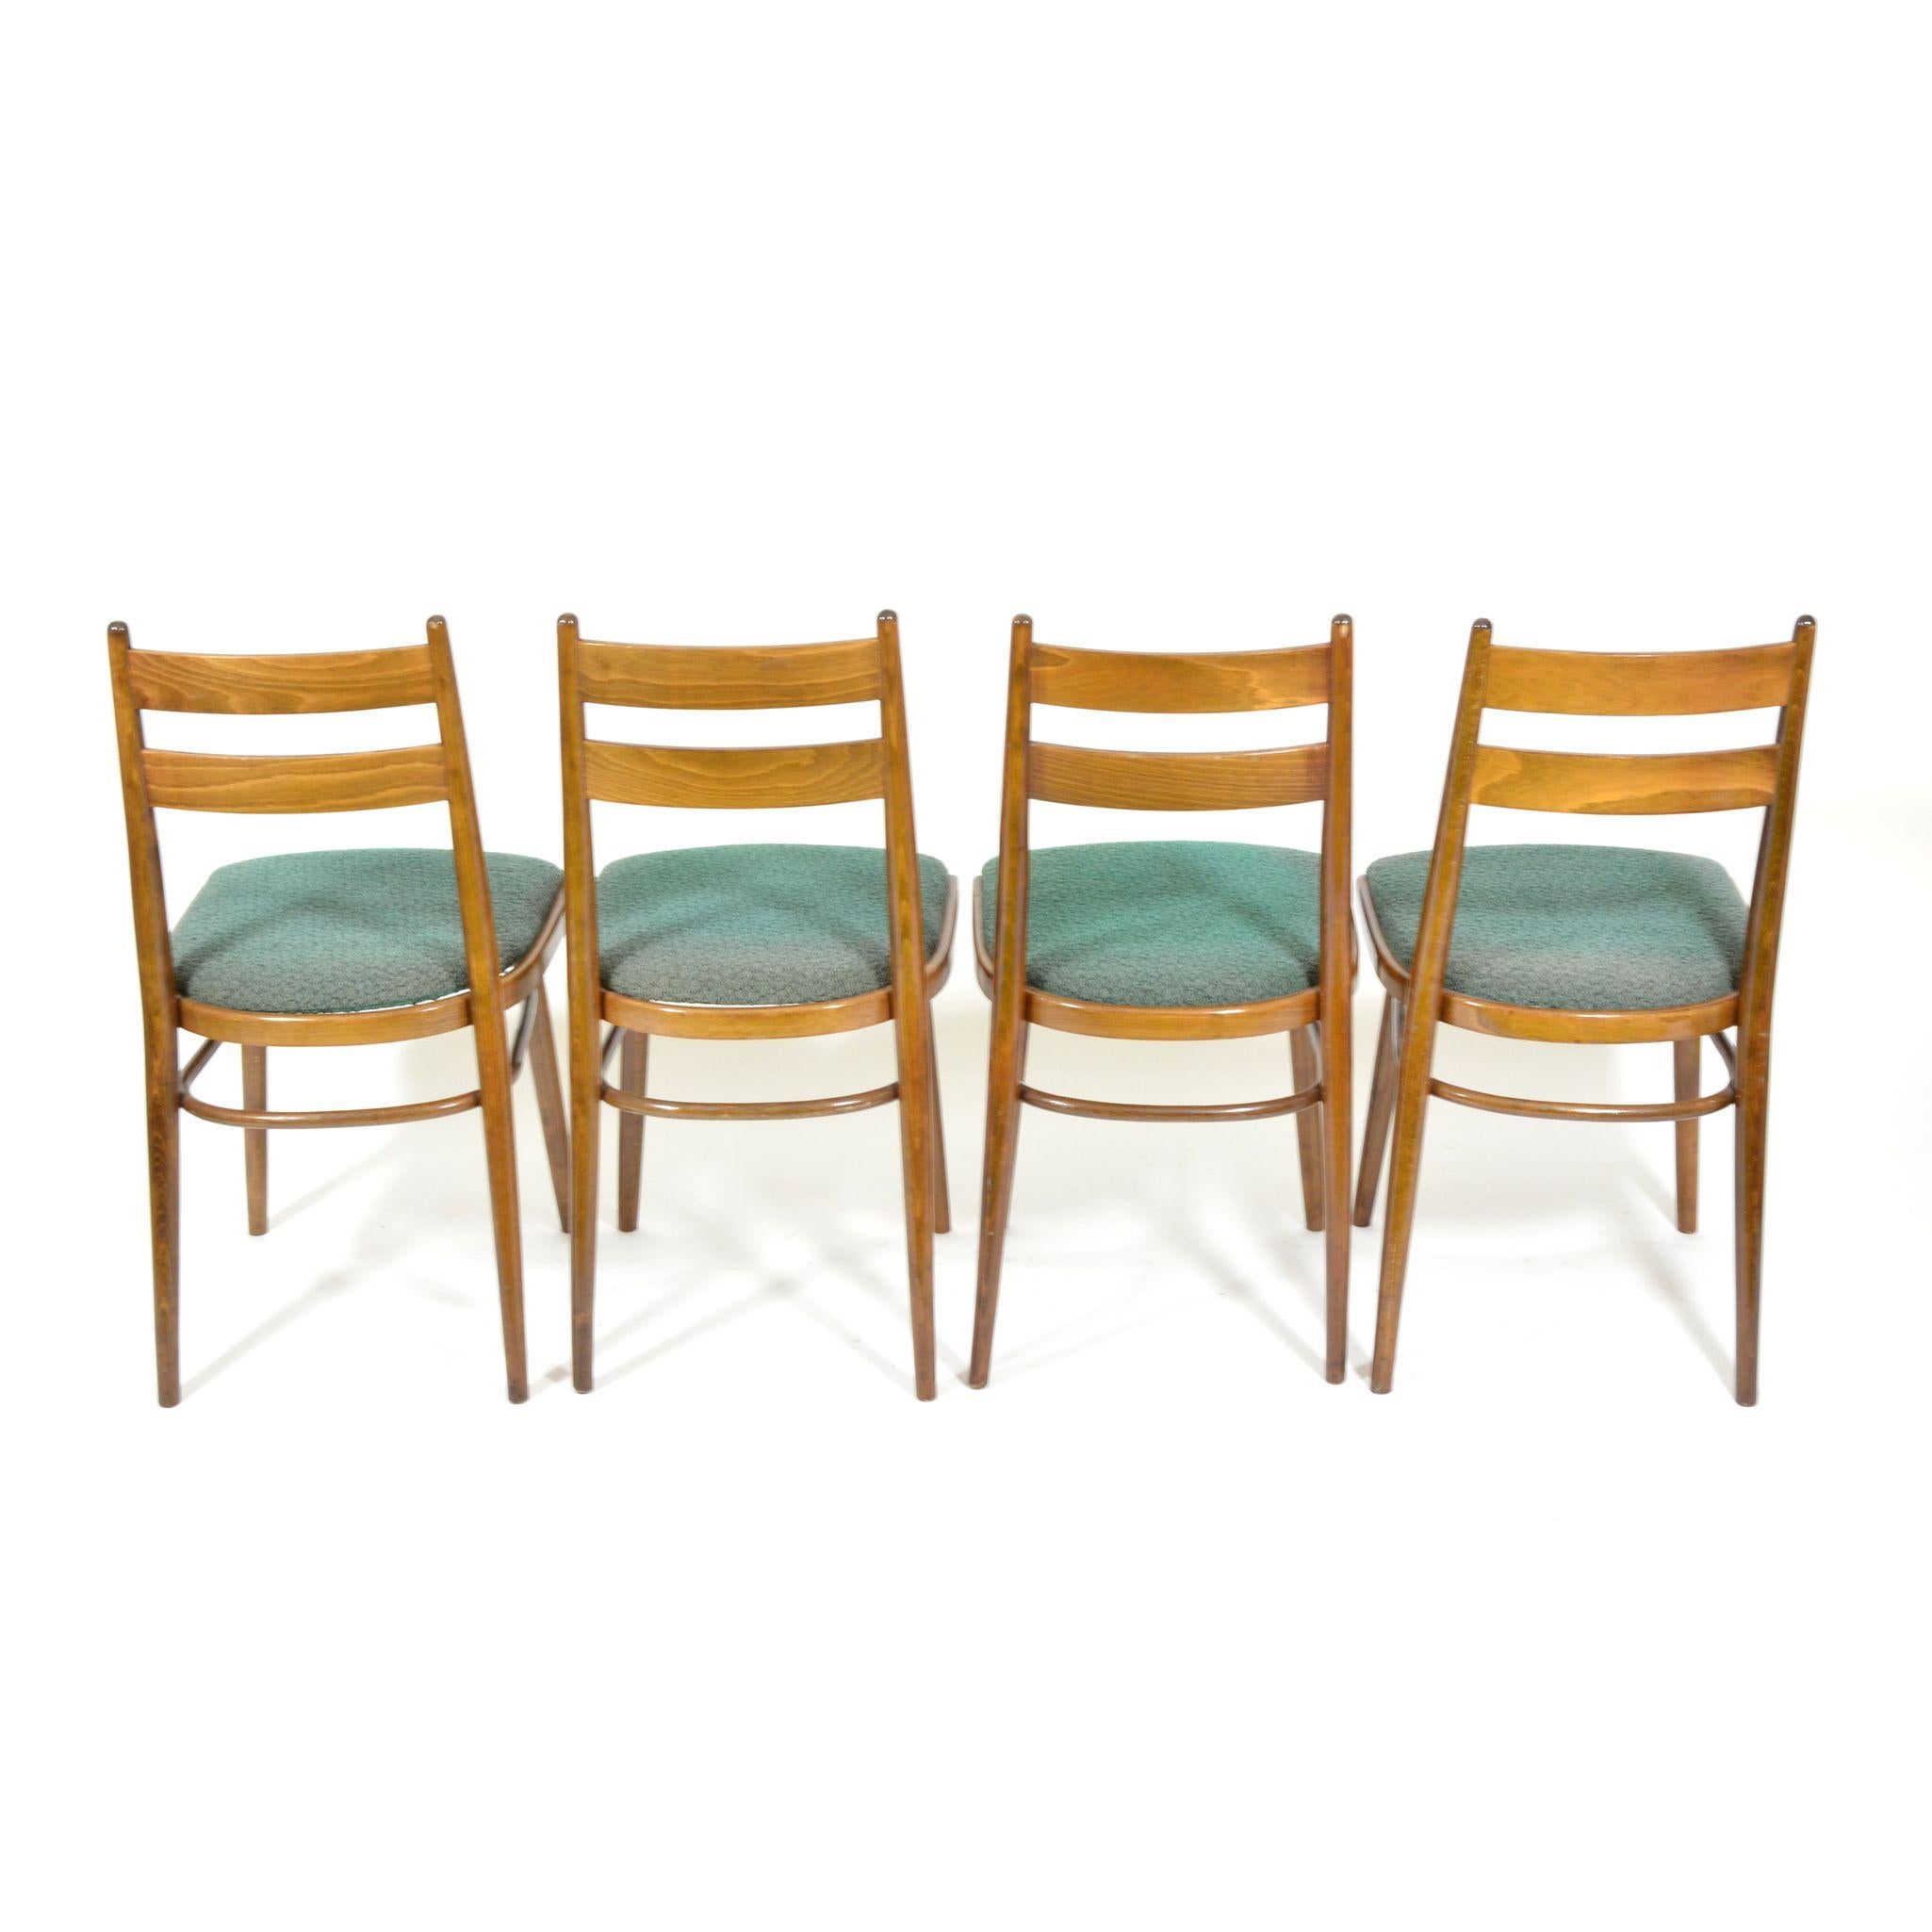 Set of Four Vintage Dining Chairs, Green Seats, Czechoslovakia, 1970s 5